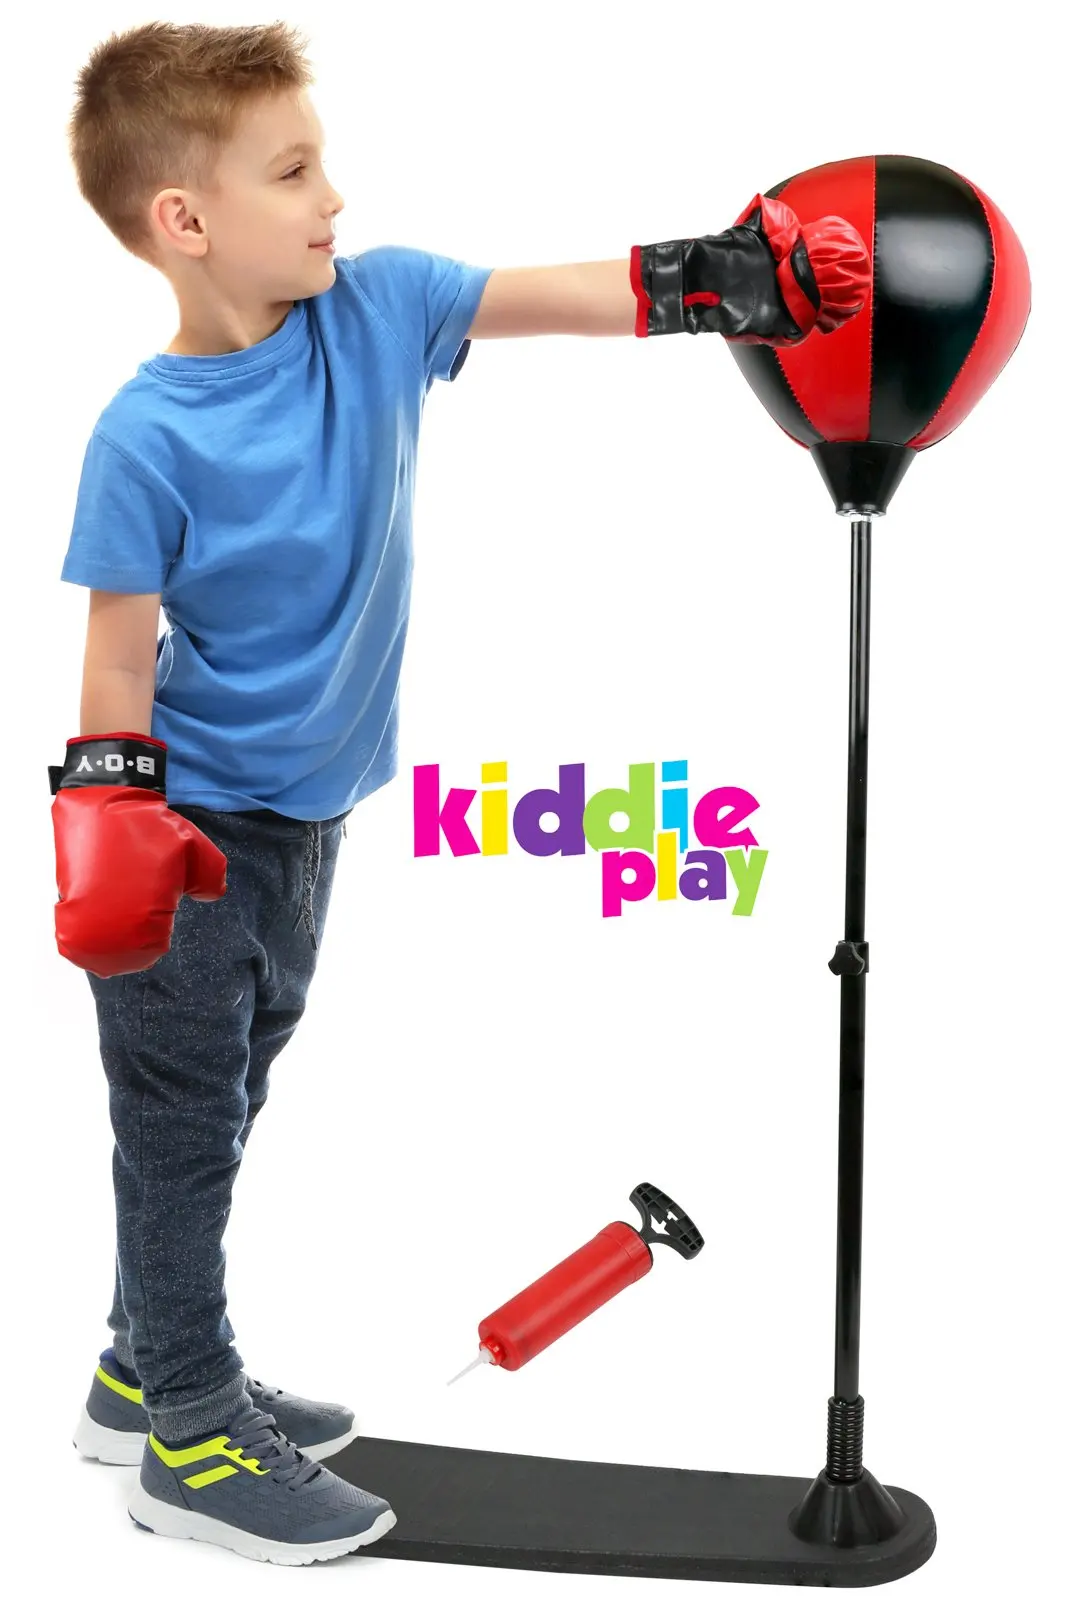 Cheap Standing Punching Bags For Sale, find Standing Punching Bags For Sale deals on line at ...